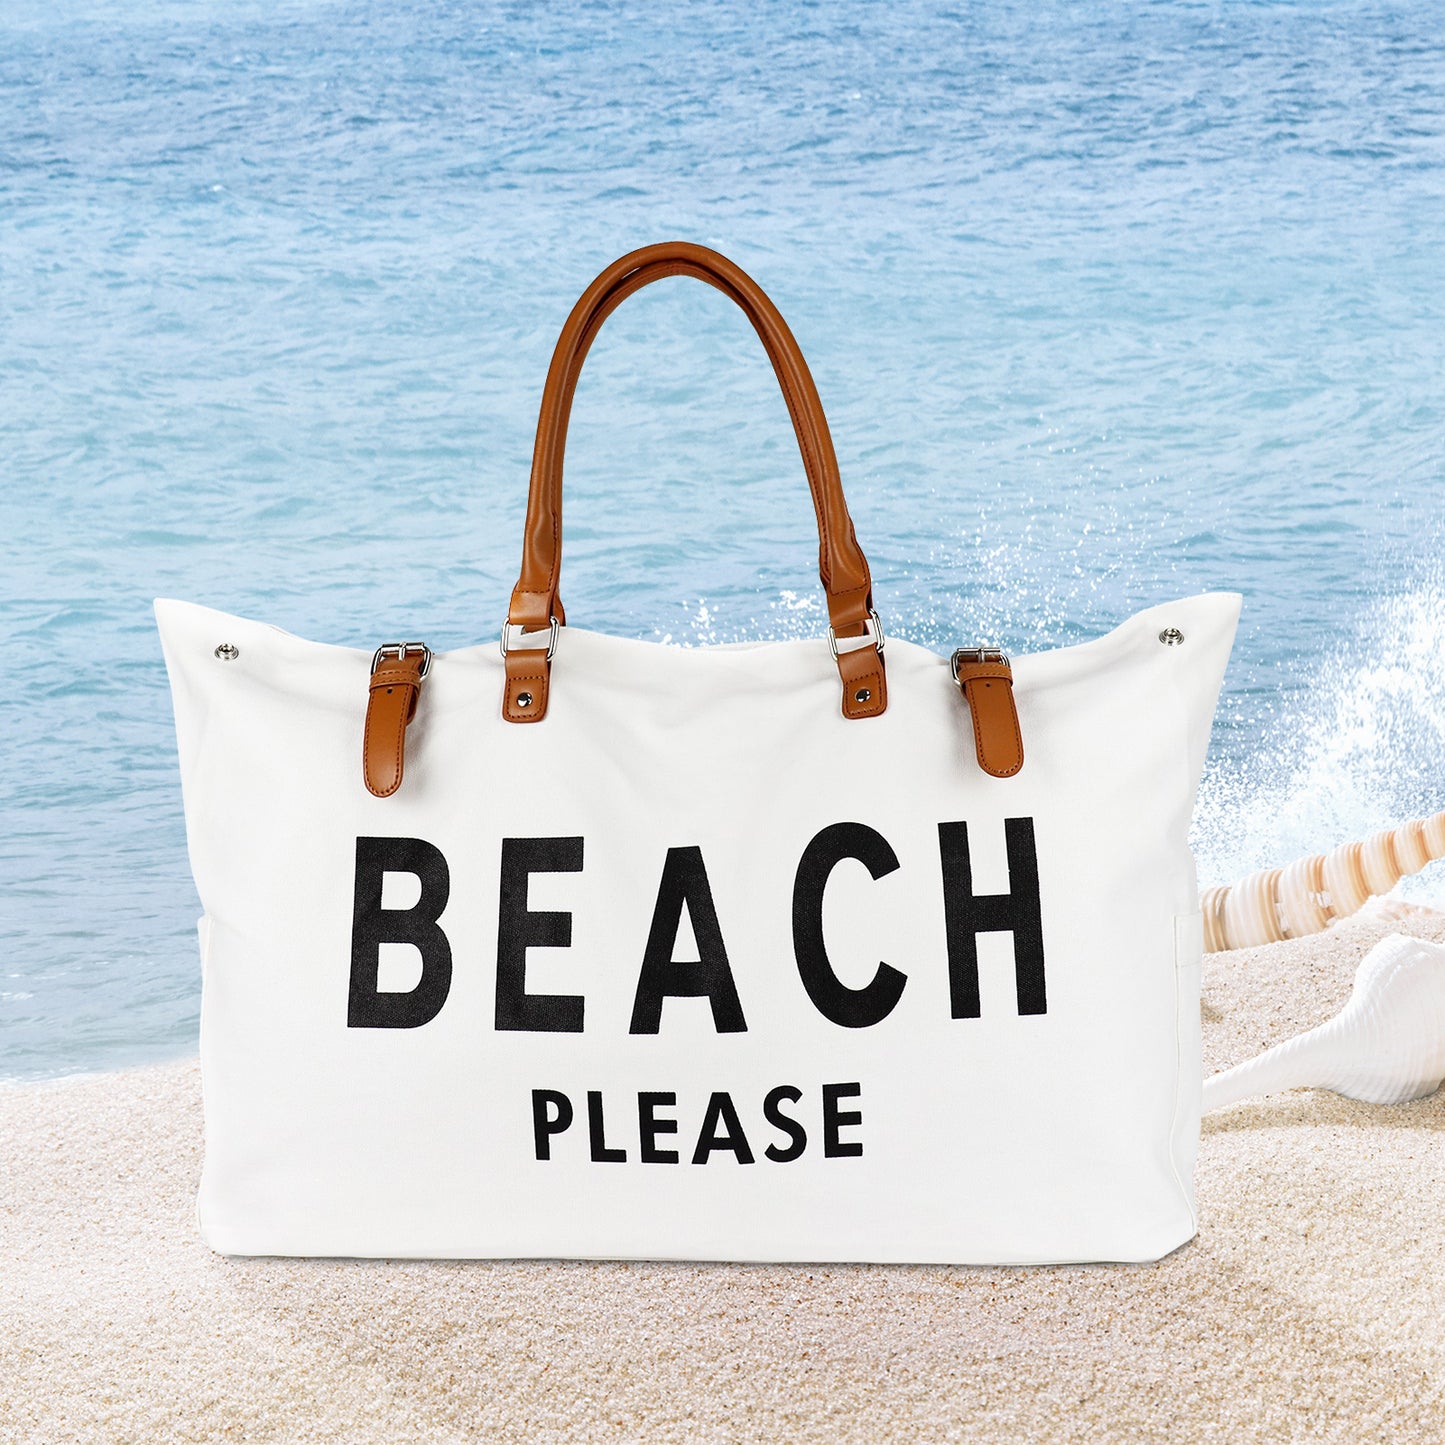 Beach Bag with Leather Handle, Extra Large Beach Bag for Women Waterproof Sandproof, Whatup Beaches Bag